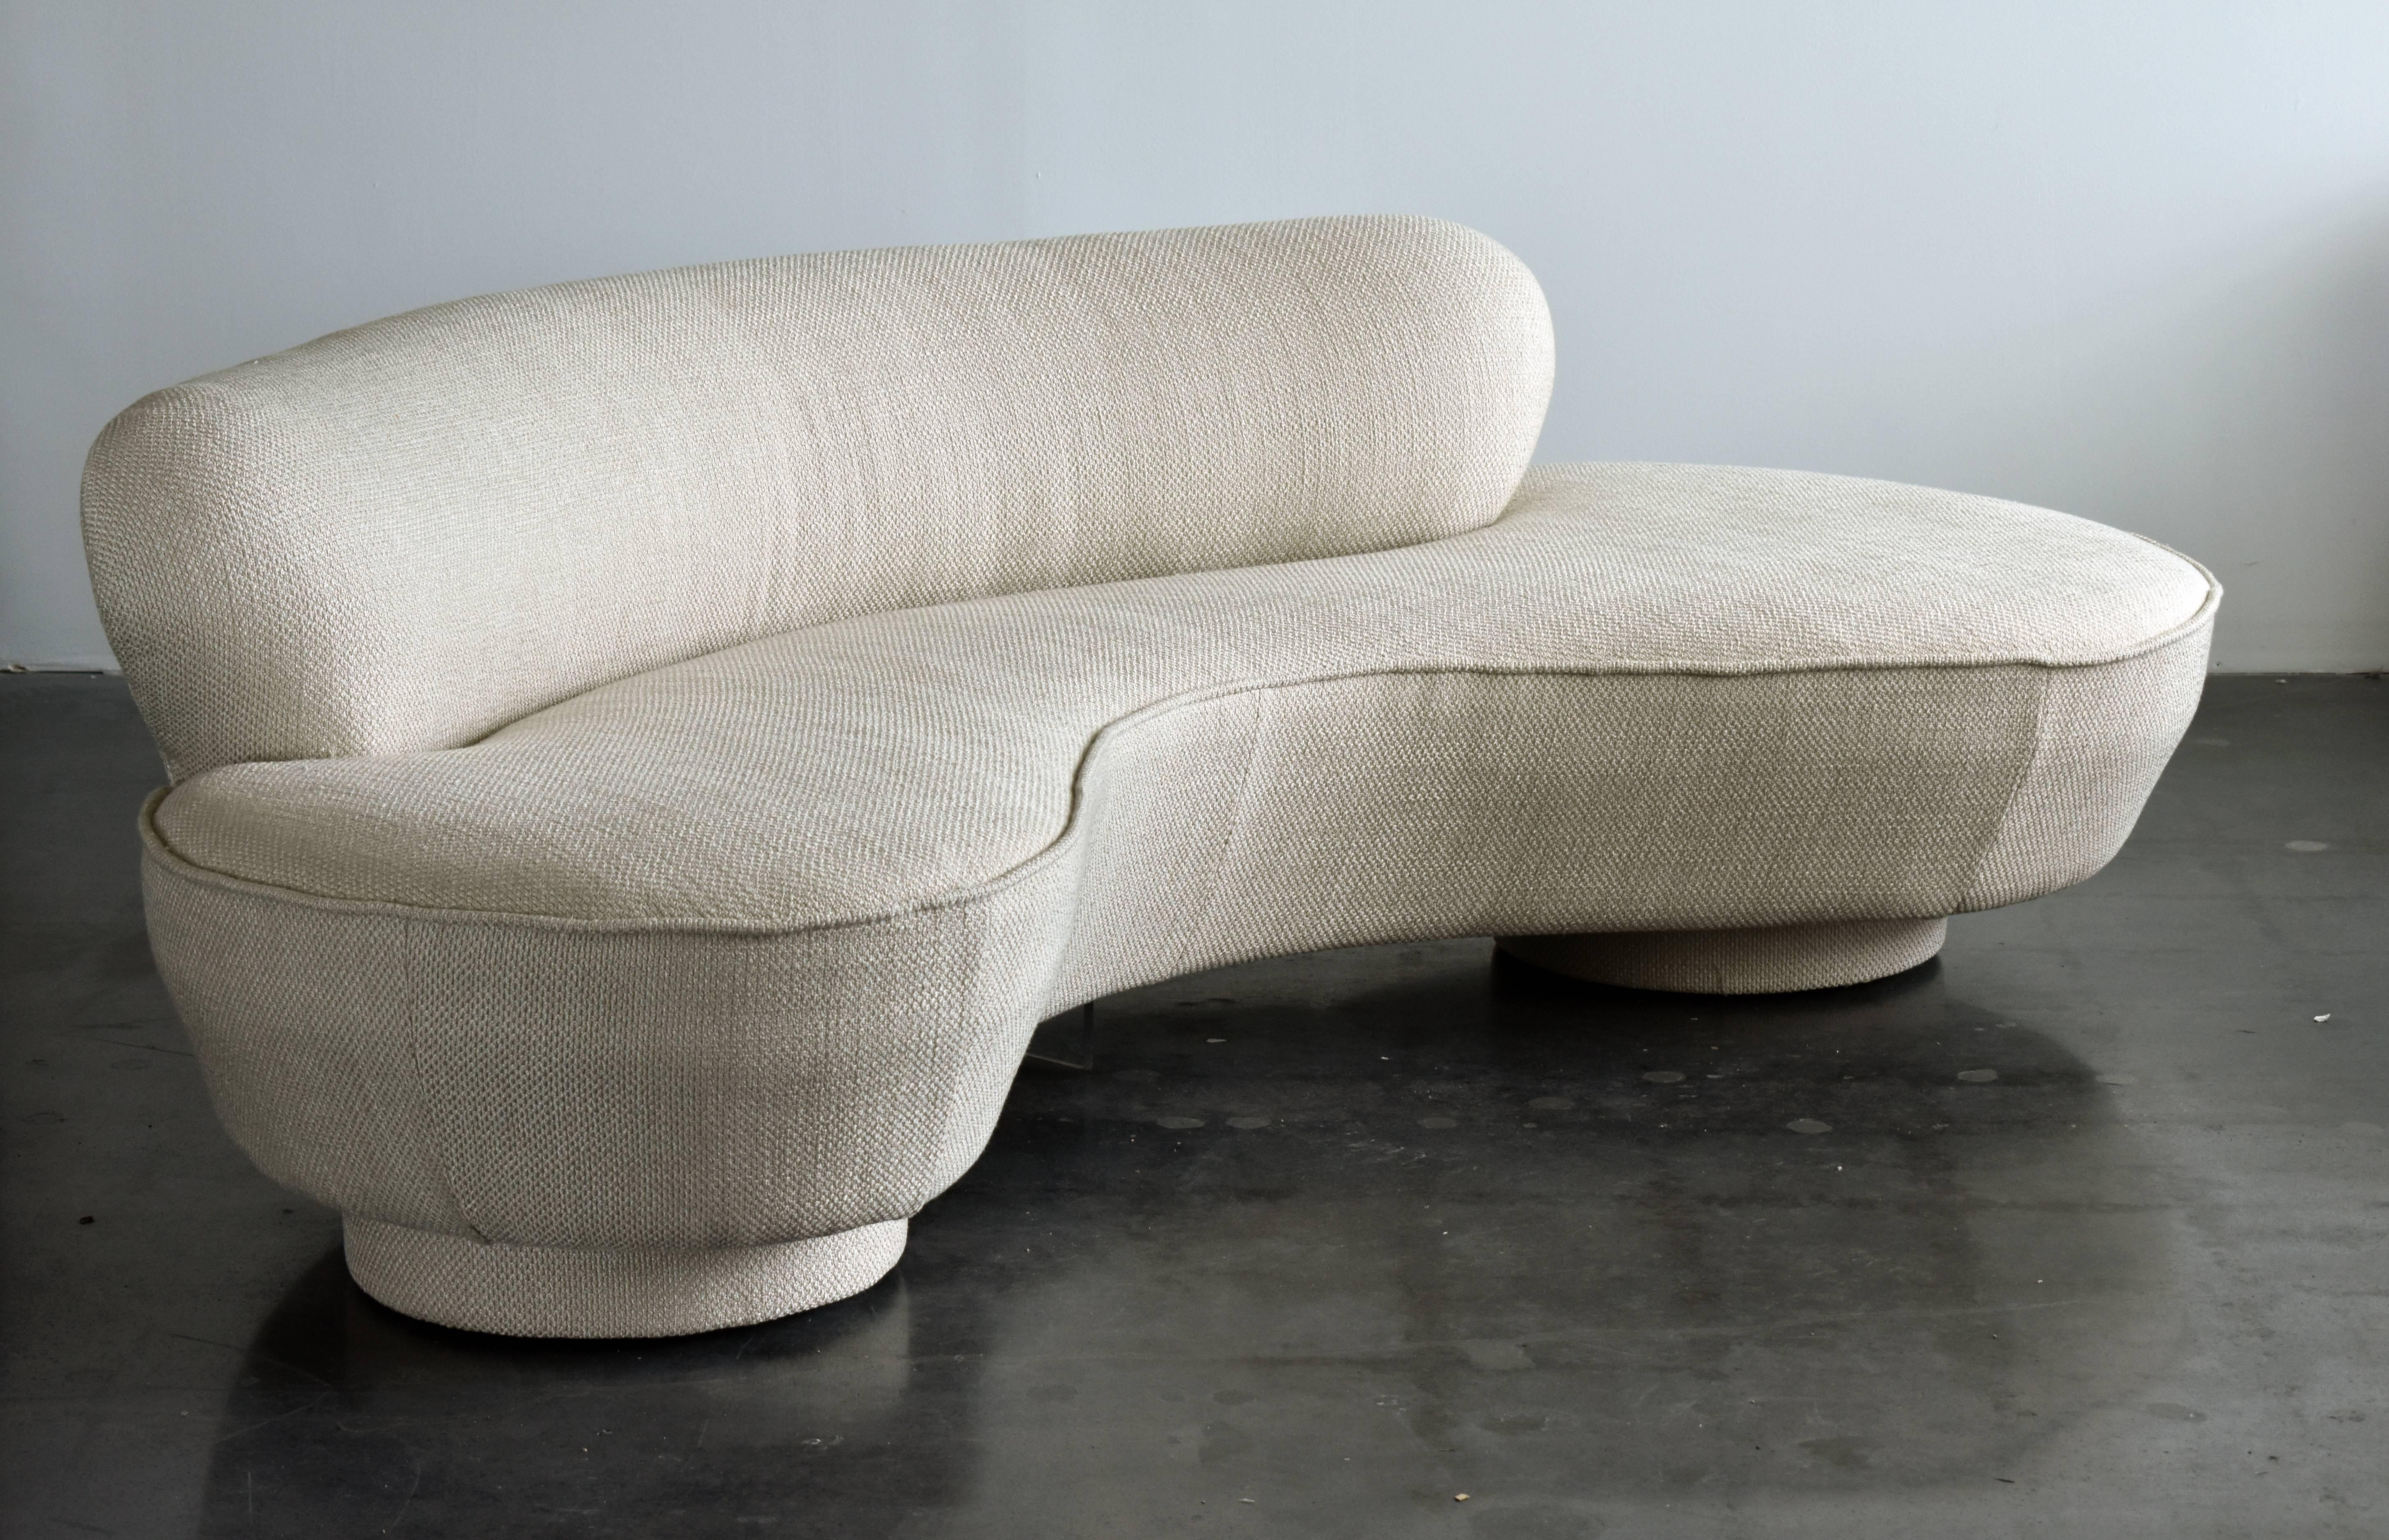 A curved sofa by Vladimir Kagan. Upholstered in new light grey high end chenille fabric. Form referencing the early organic design movement. Executed by Directional.

Other American designers of the era include Edward Wormley, Philip & Kelvin